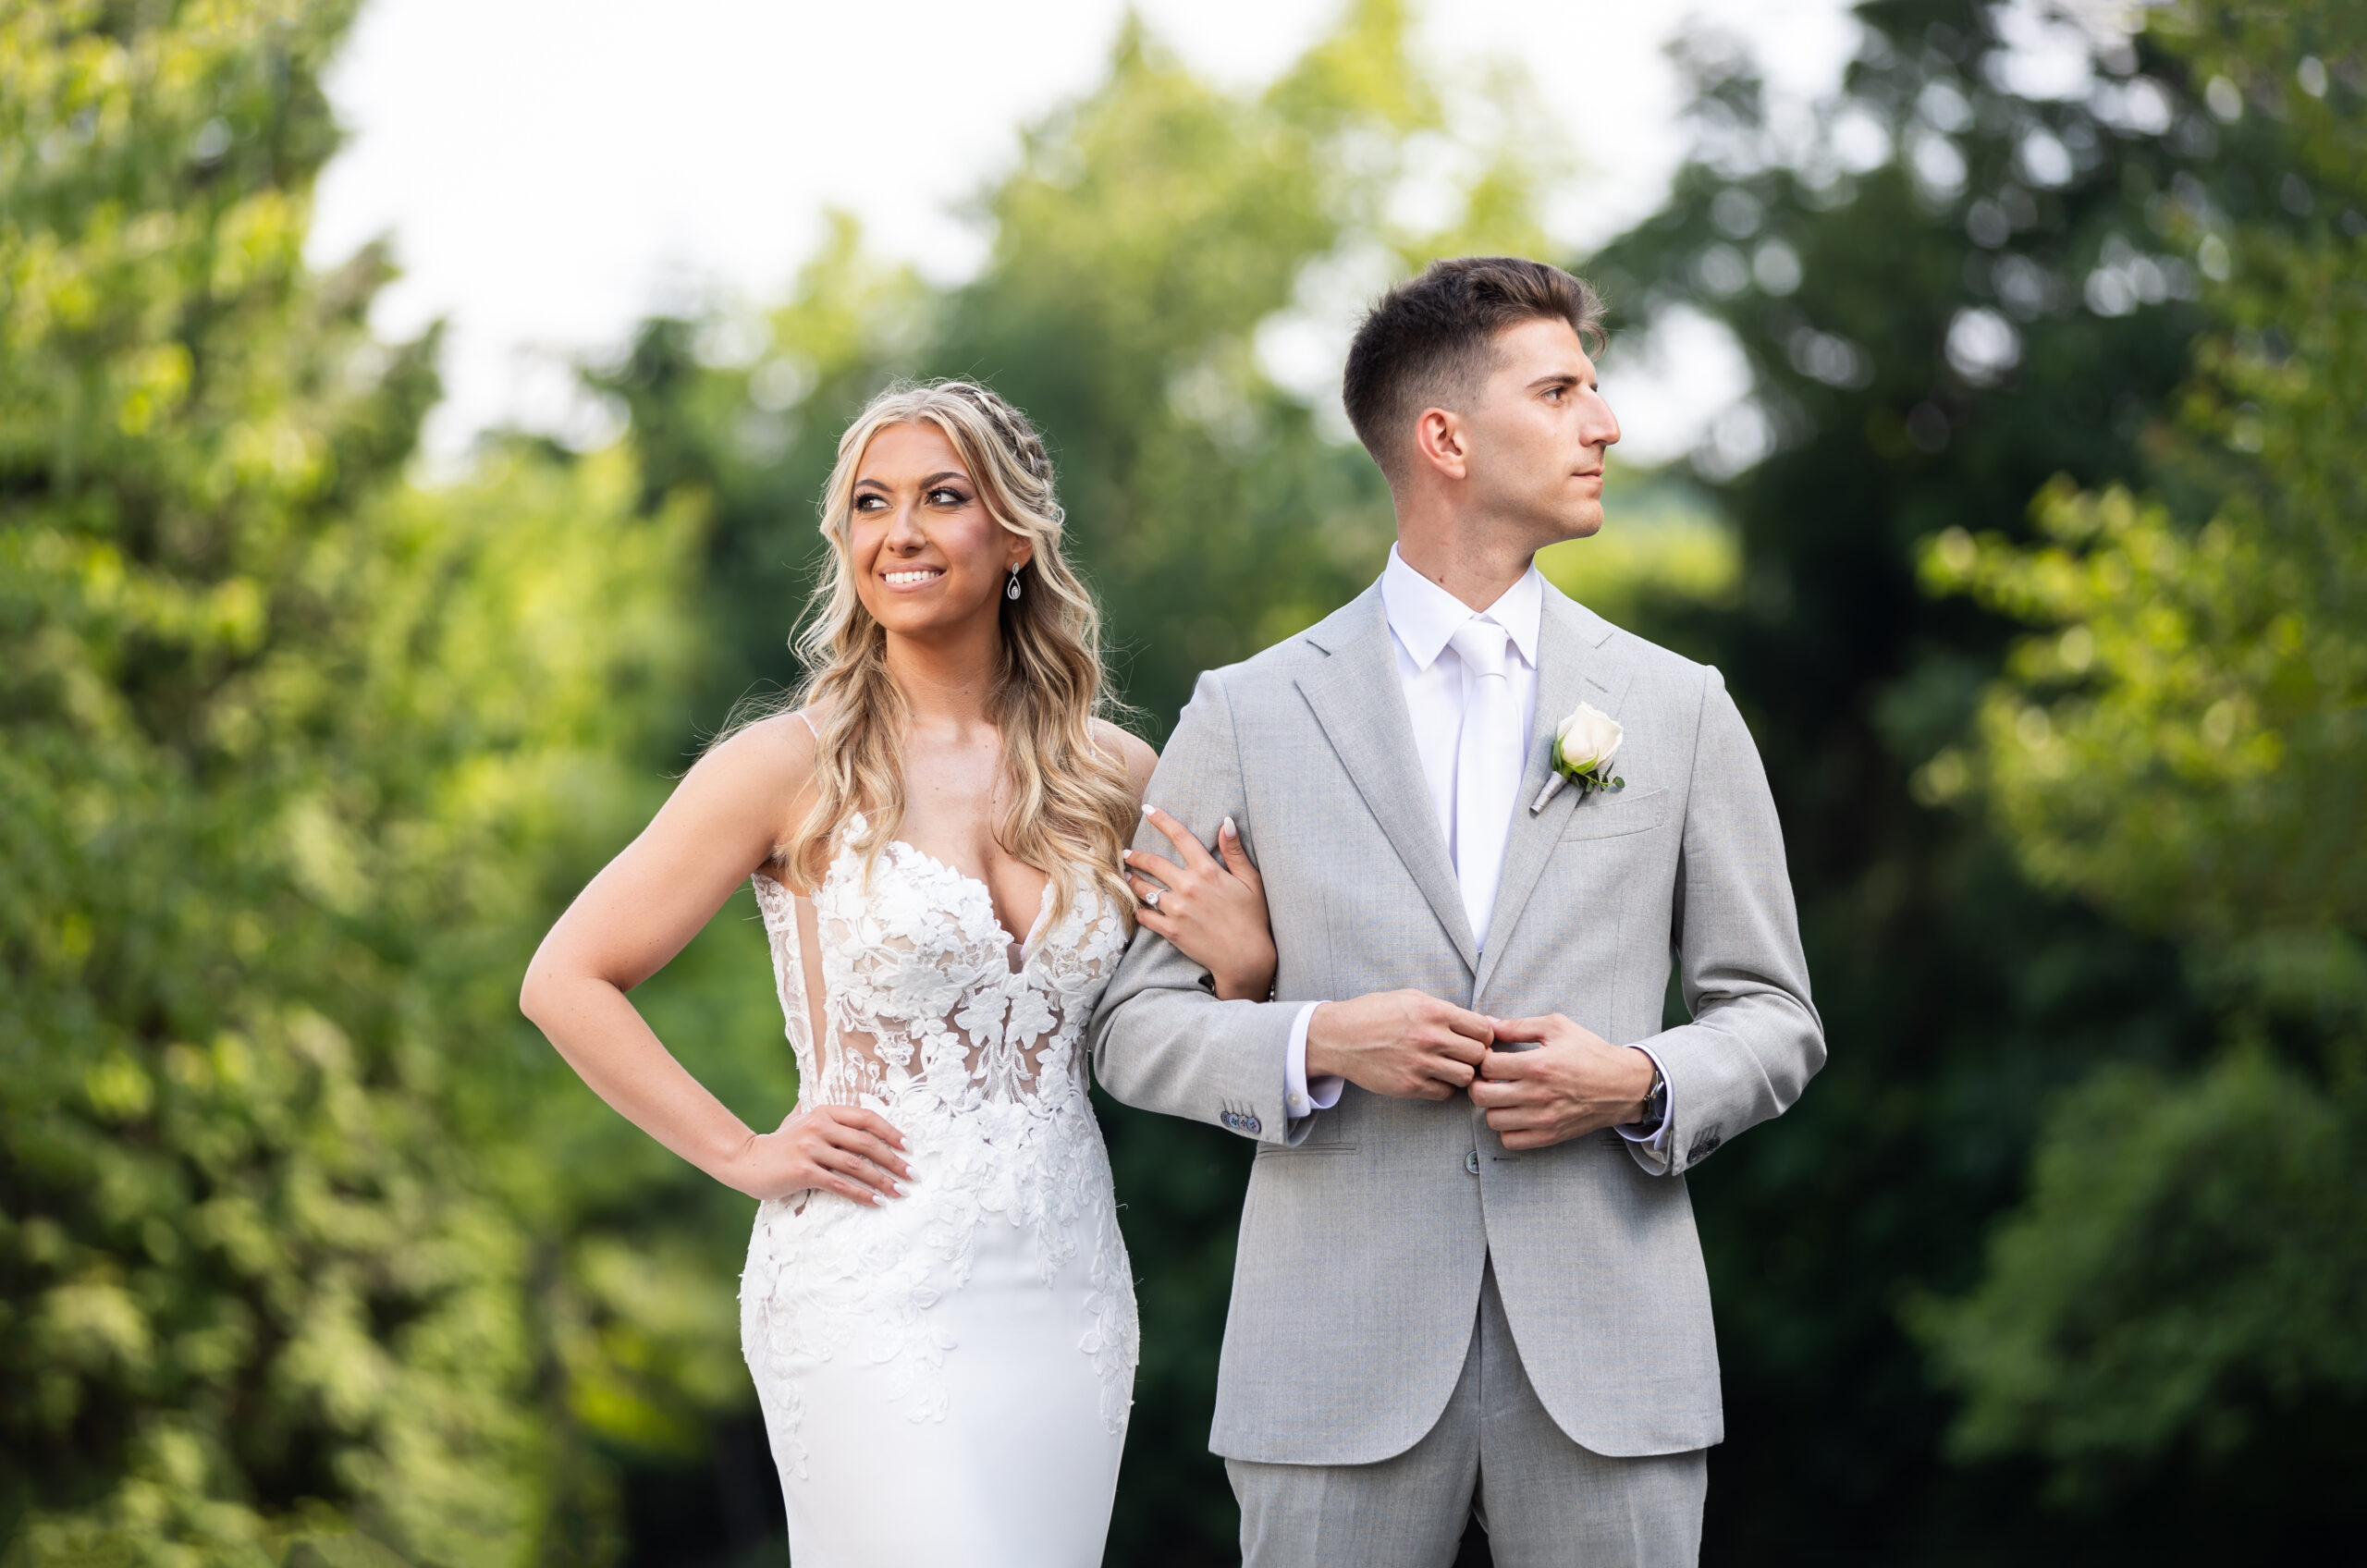 Artistic wedding day portrait featuring the bride and groom at The Meadow Wood Venue in Randolph, New Jersey. The image showcases the couple's love on their special day, with creative flair., captured by North Jersey wedding photographer Jarot Bocanegra